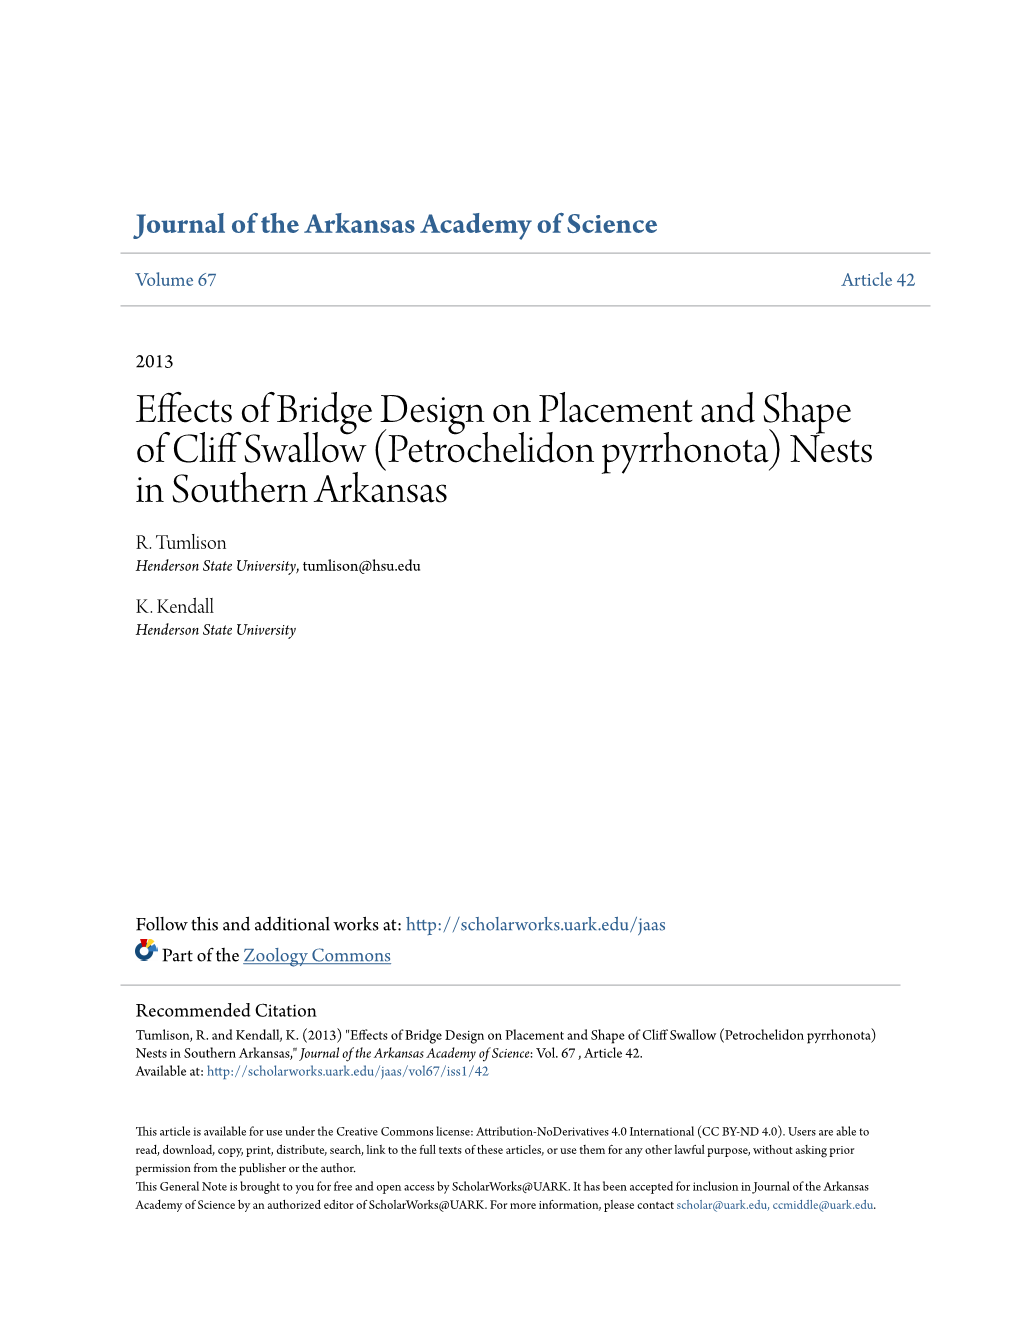 Effects of Bridge Design on Placement and Shape of Cliff Swallow (Petrochelidon Pyrrhonota) Nests in Southern Arkansas